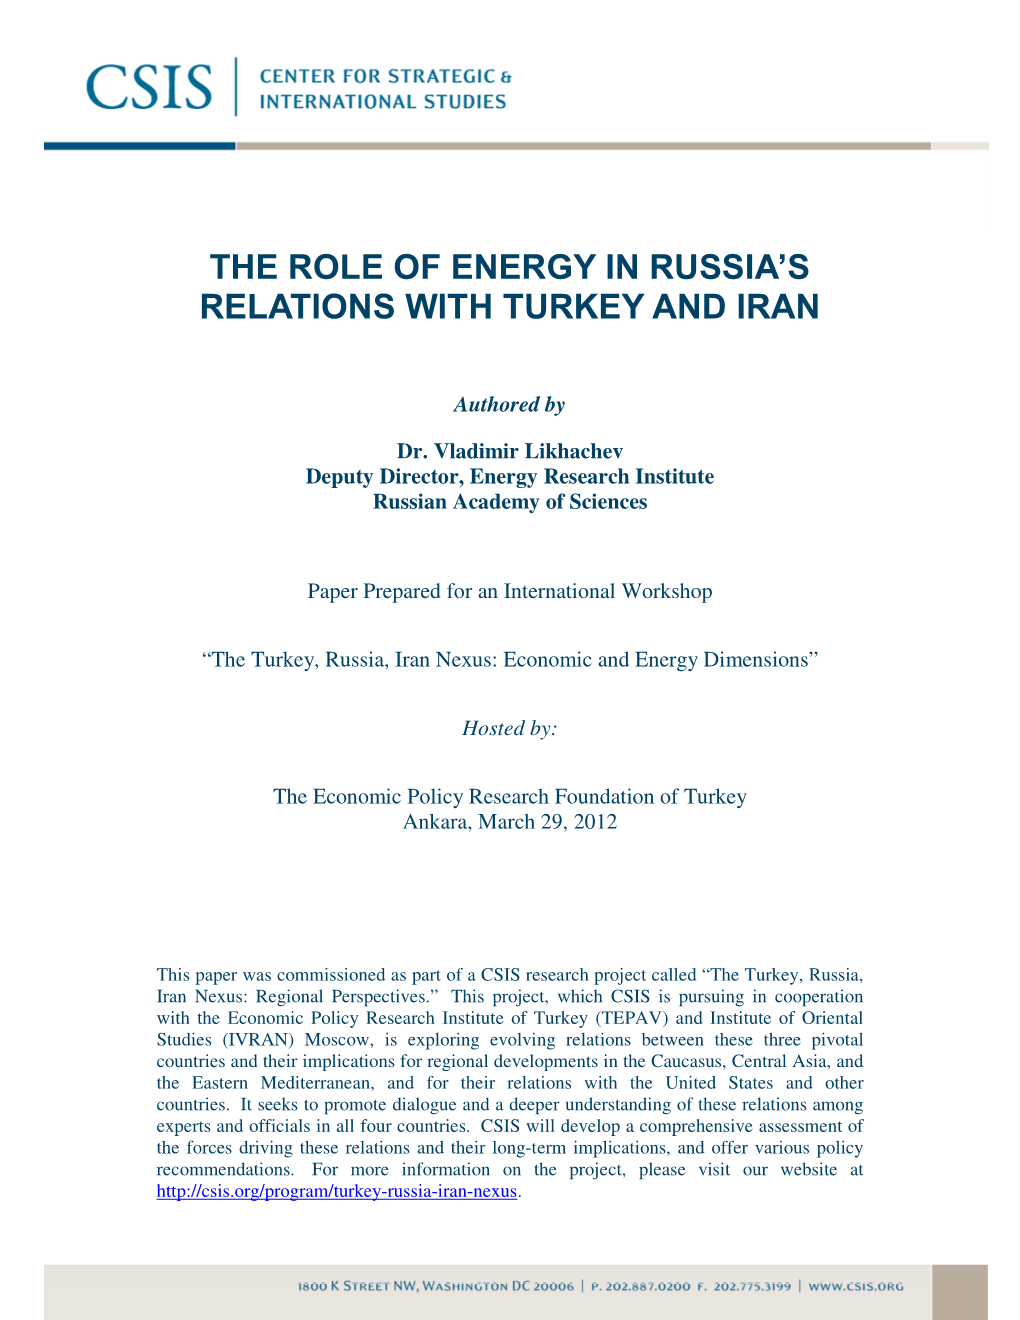 The Role of Energy in Russia's Relations with Turkey and Iran